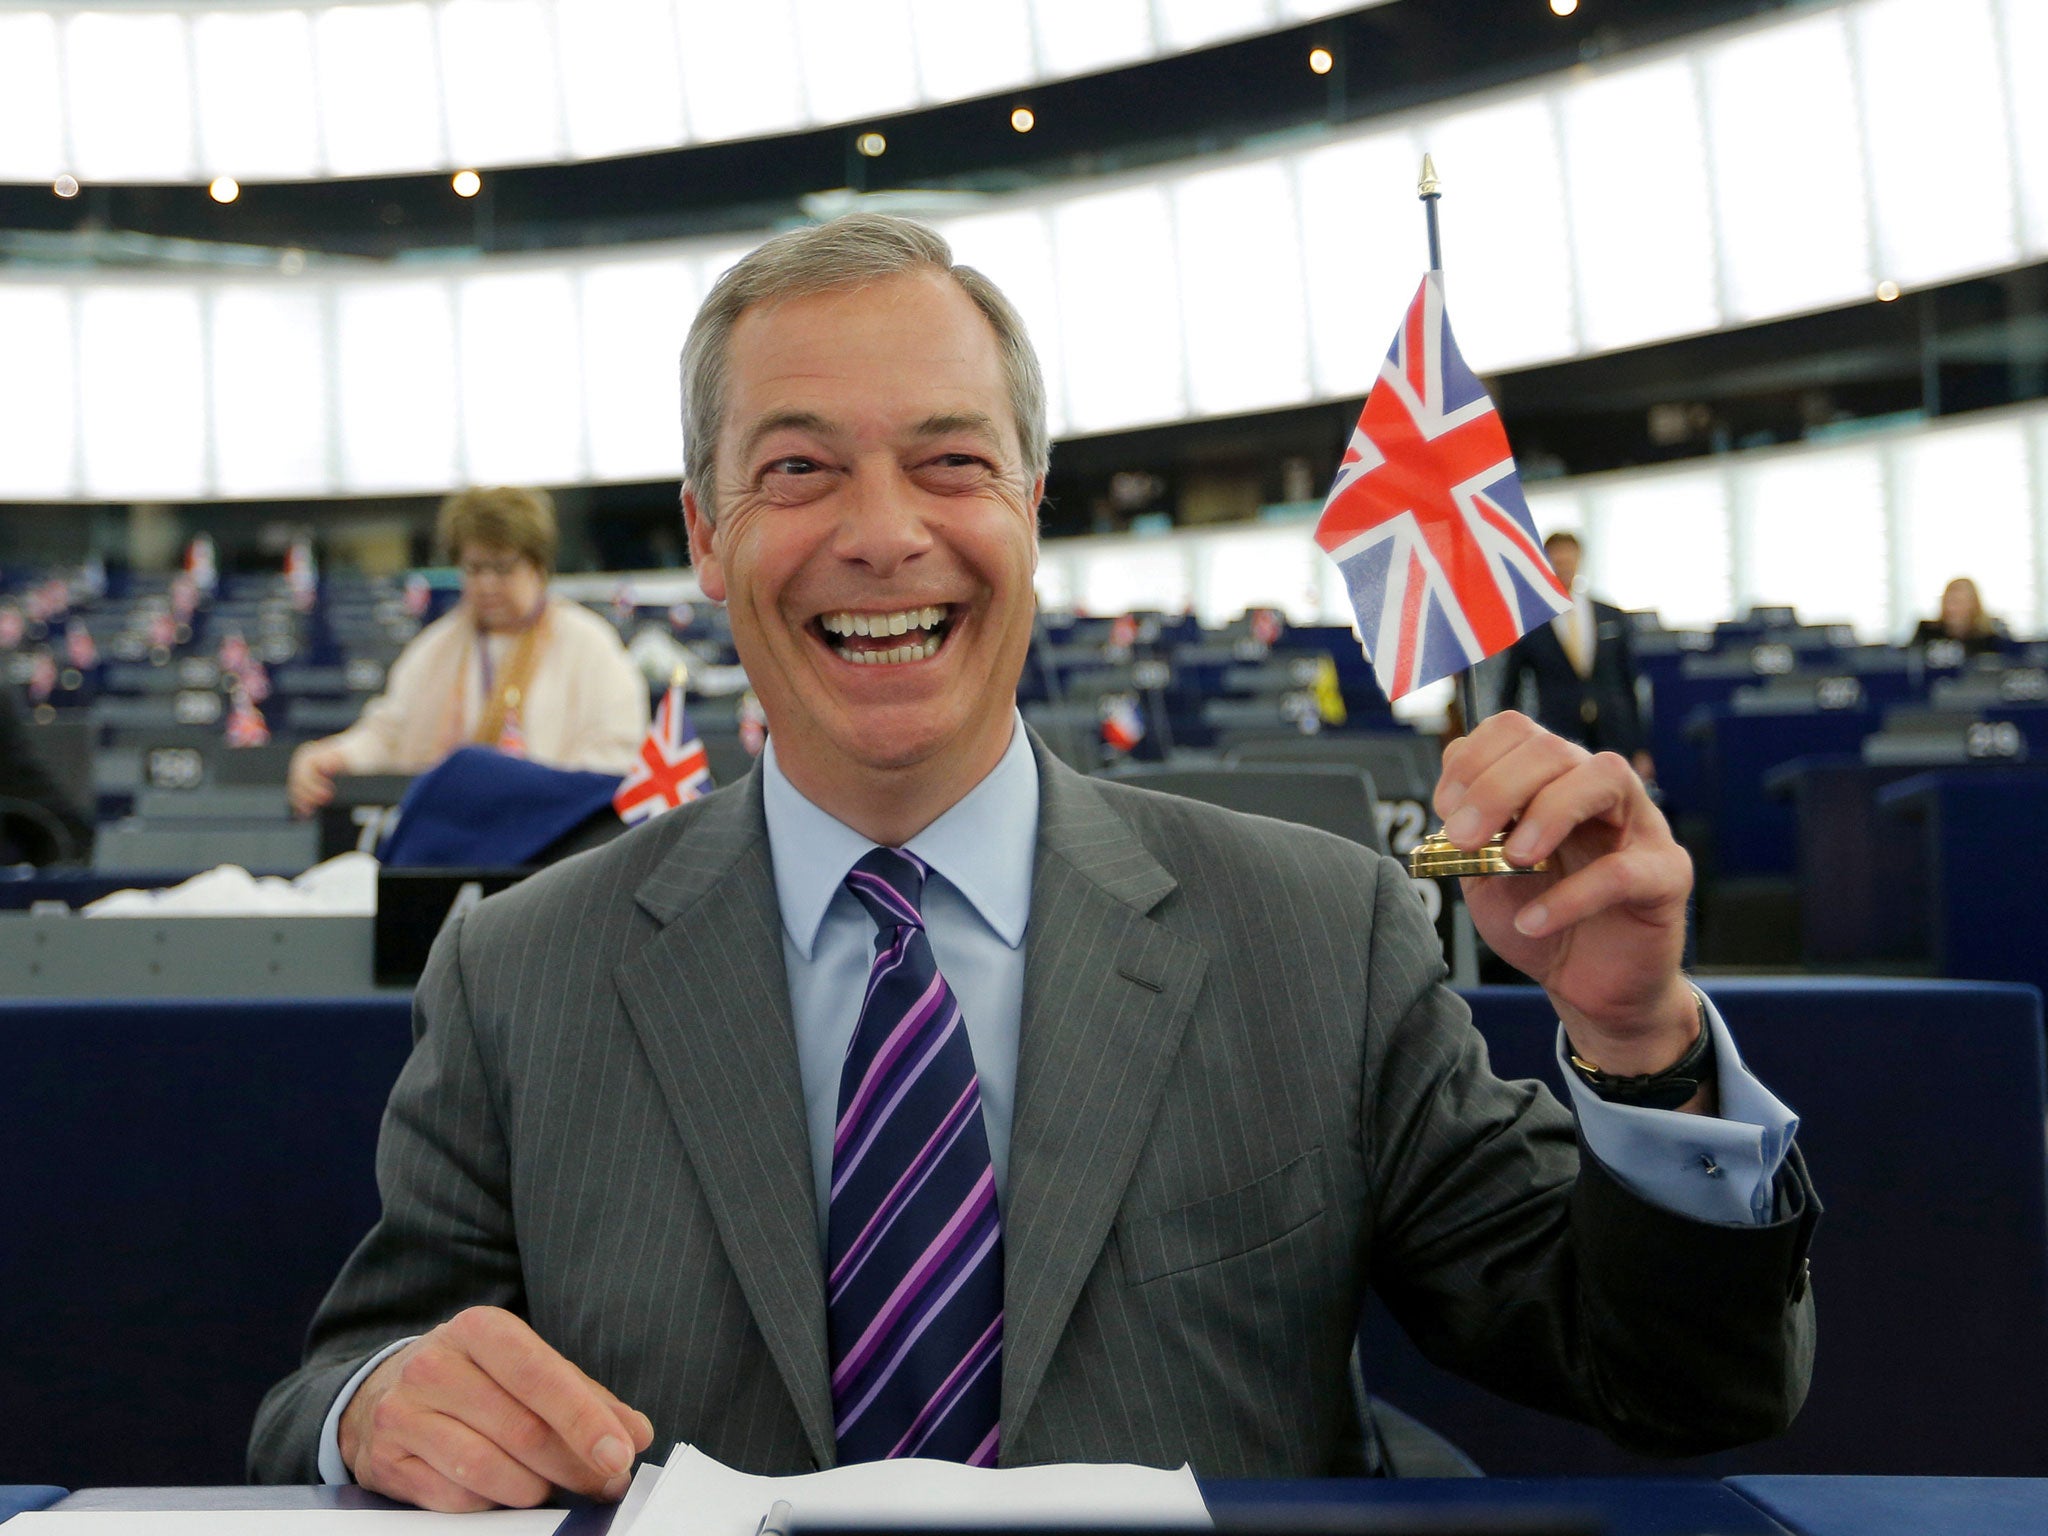 Nigel Farage said that without a bank account ‘you don’t actually exist’